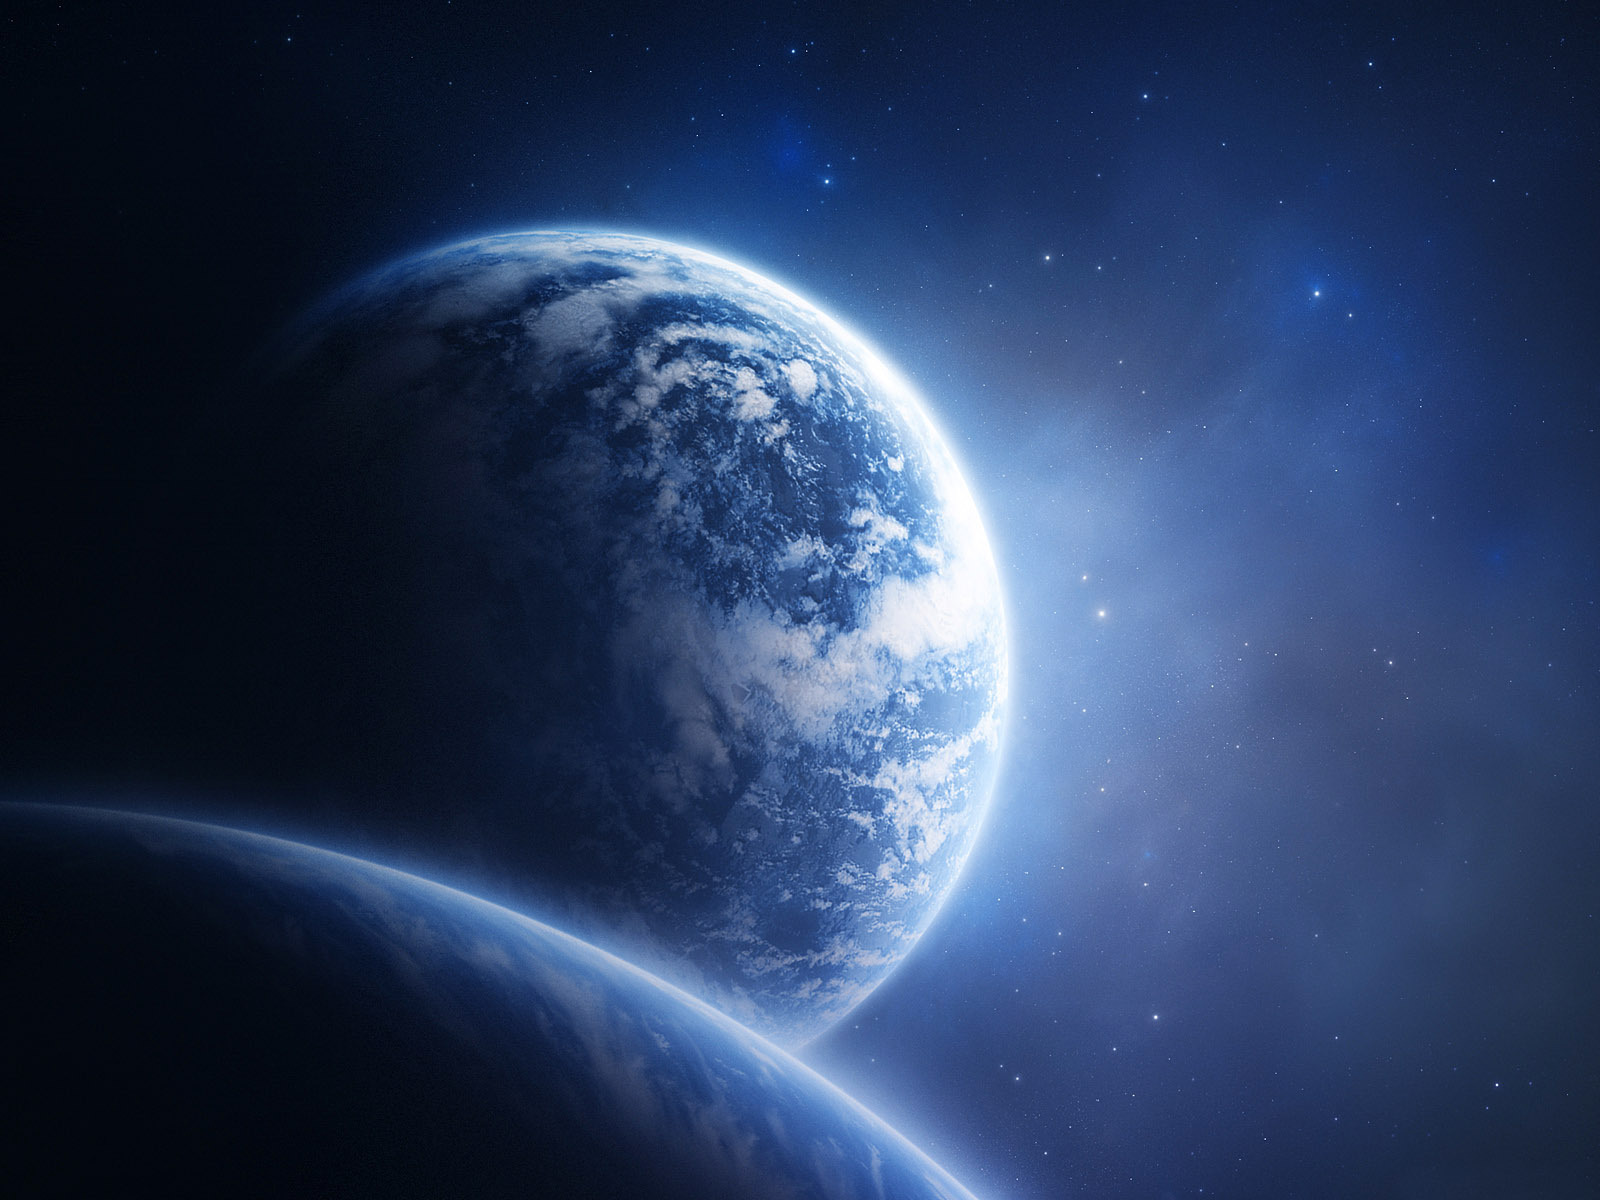 universo wallpaper,outer space,atmosphere,planet,nature,astronomical object